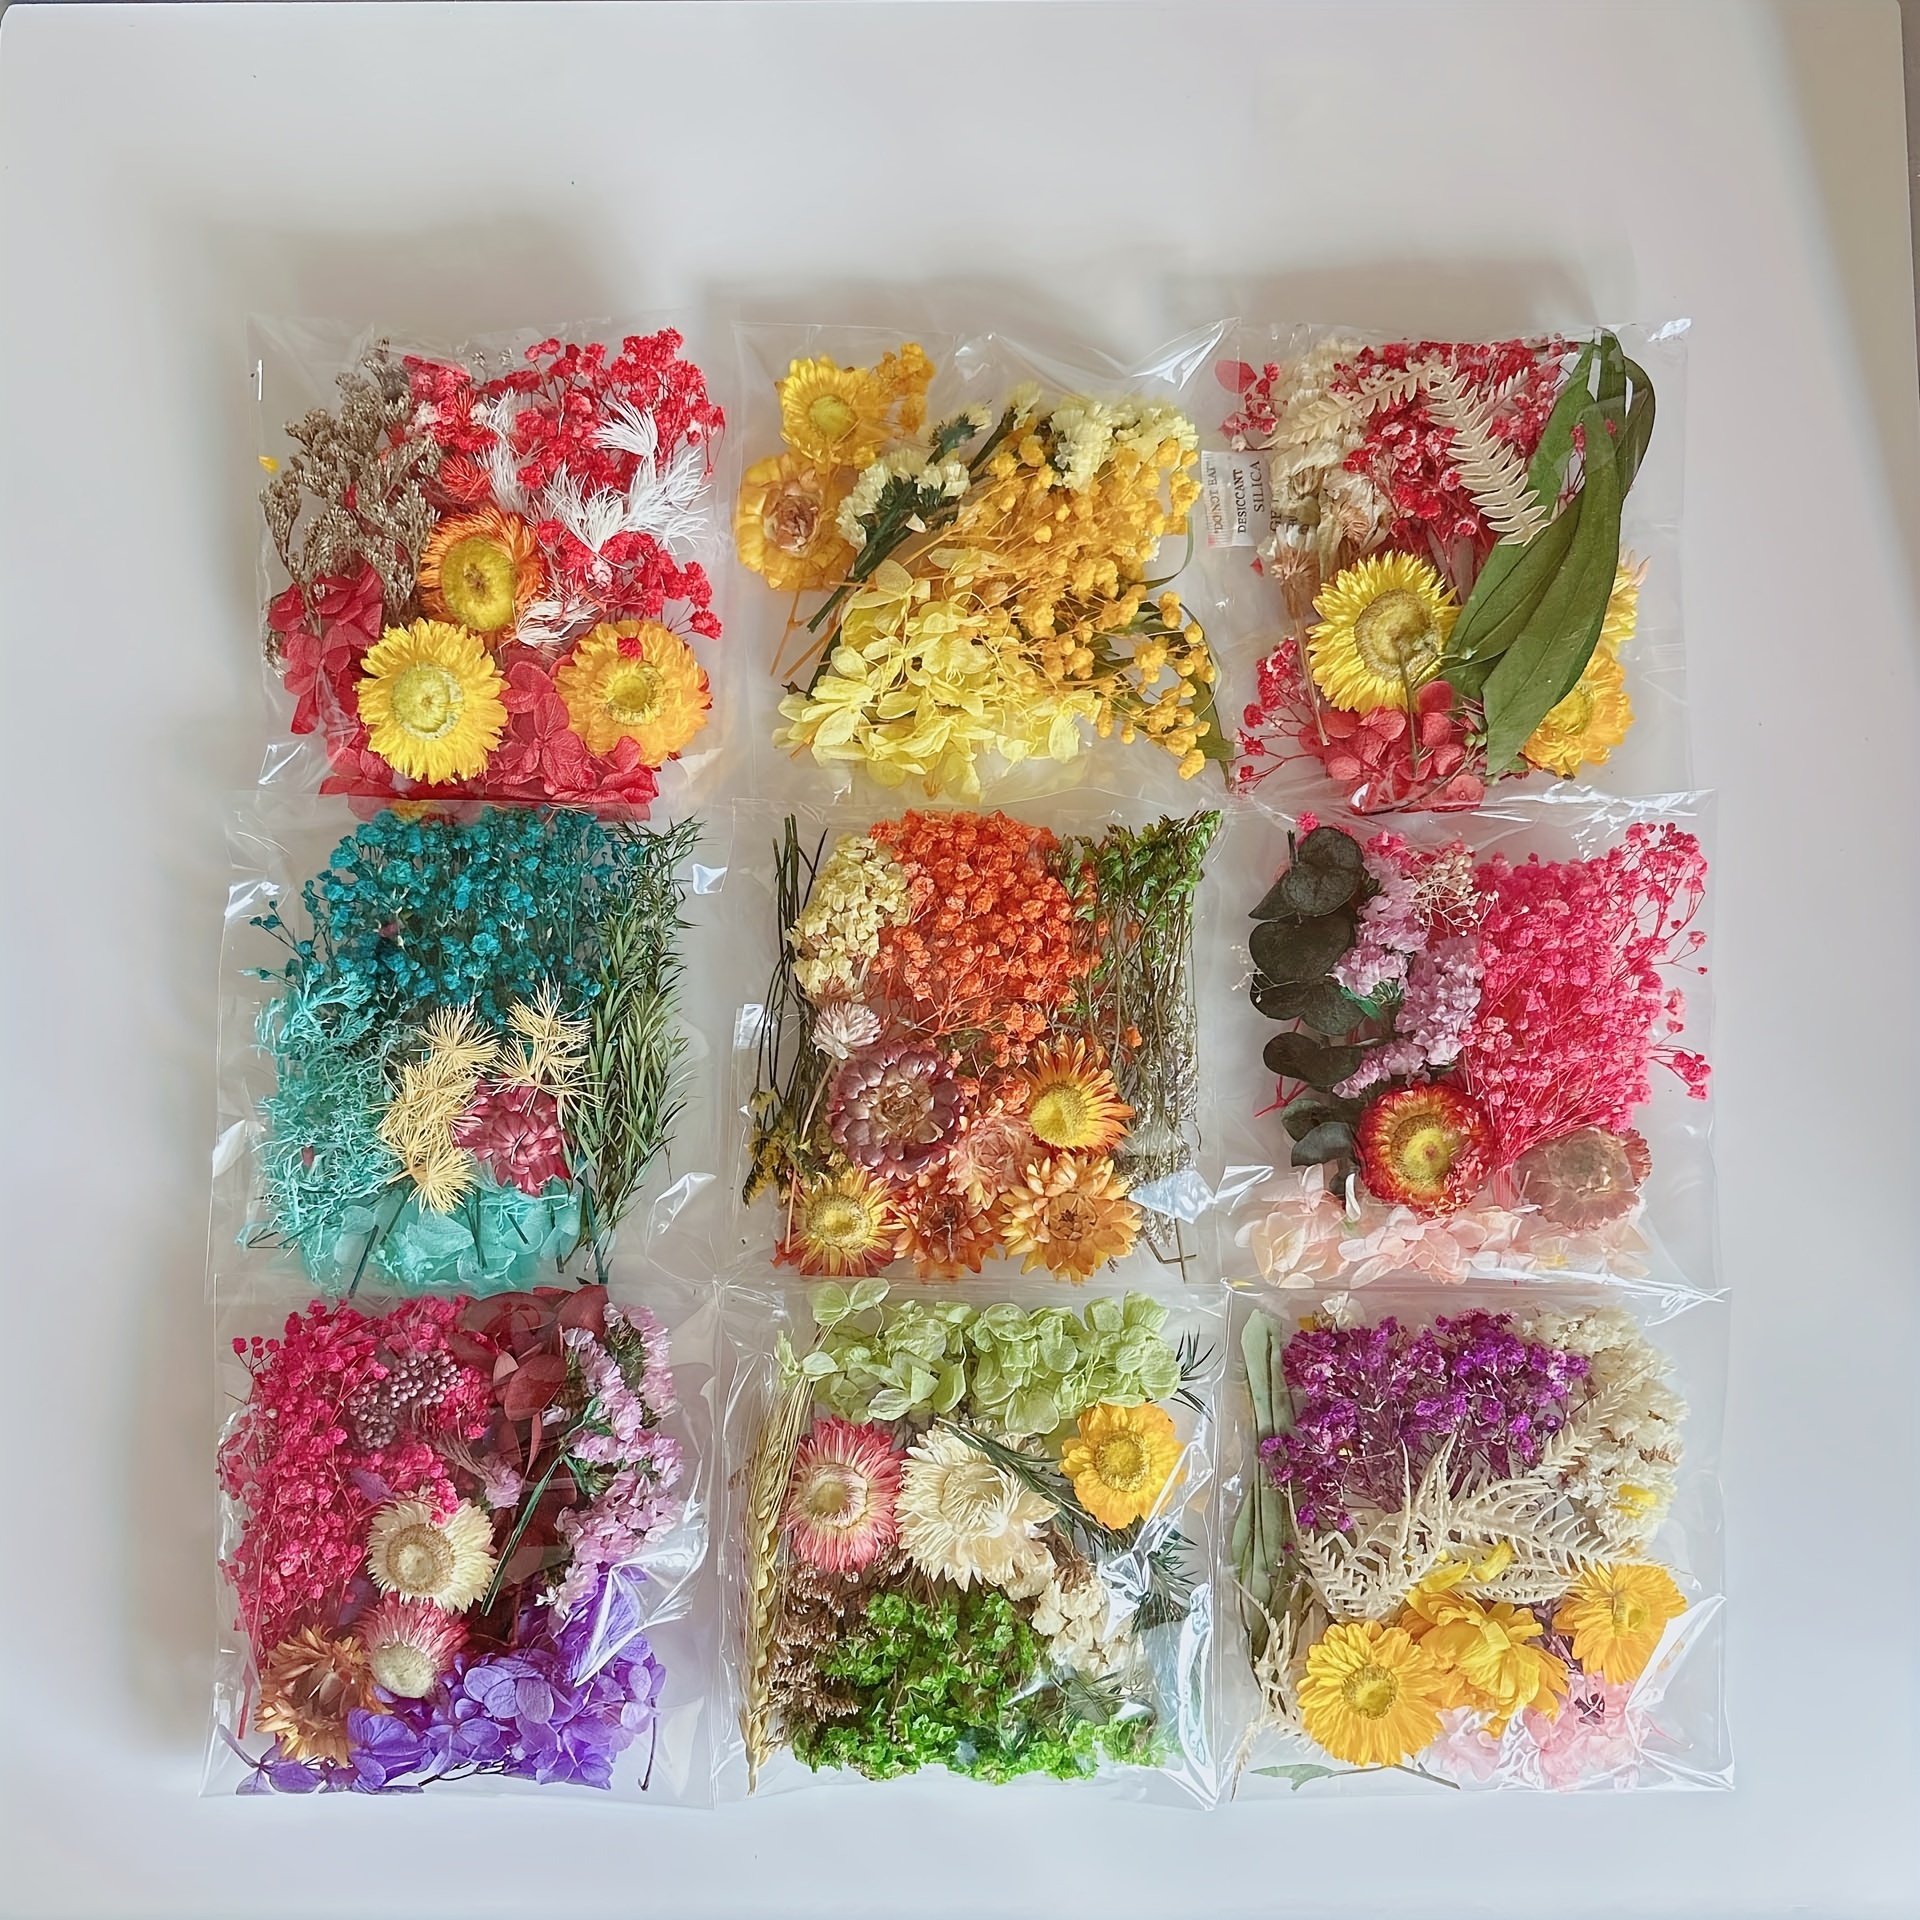 

Natural Dried Flowers And Leaves Assortment - 1 Bag Of Mixed Pressed Flowers, Fruits & Plants For Resin Crafts, Scrapbooking, Candle Making, And Wedding Party Home Decor